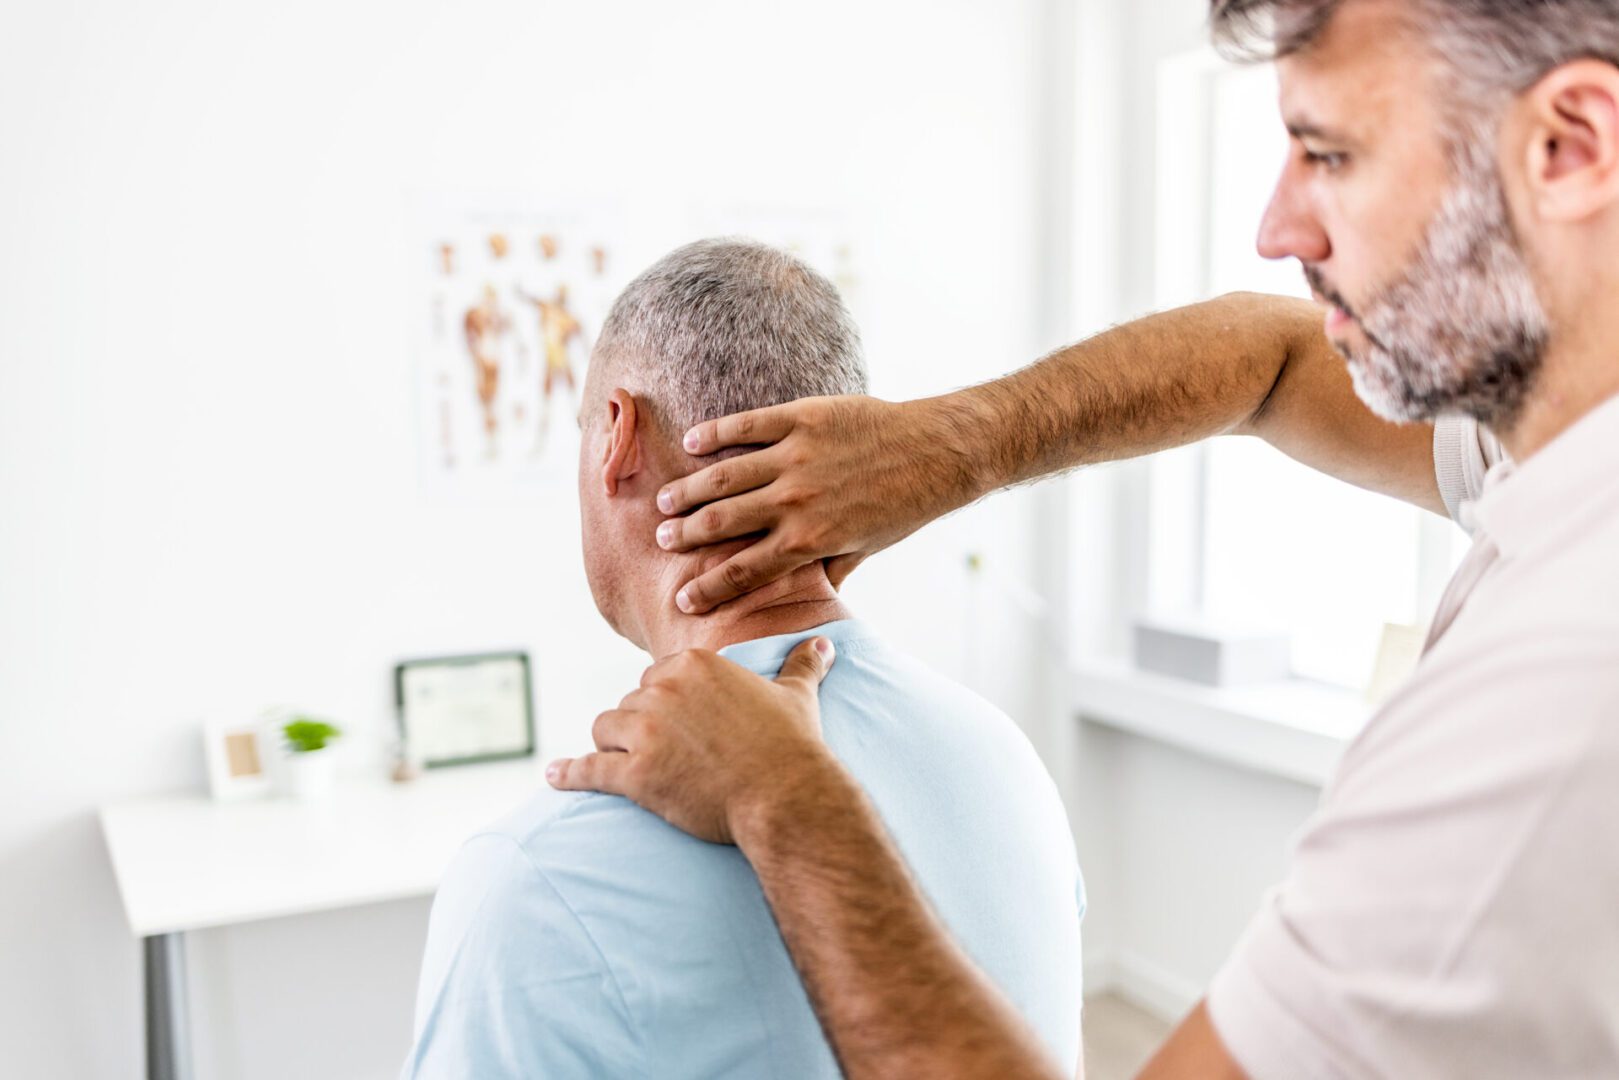 Male doctor examined the neck pain of a male patient